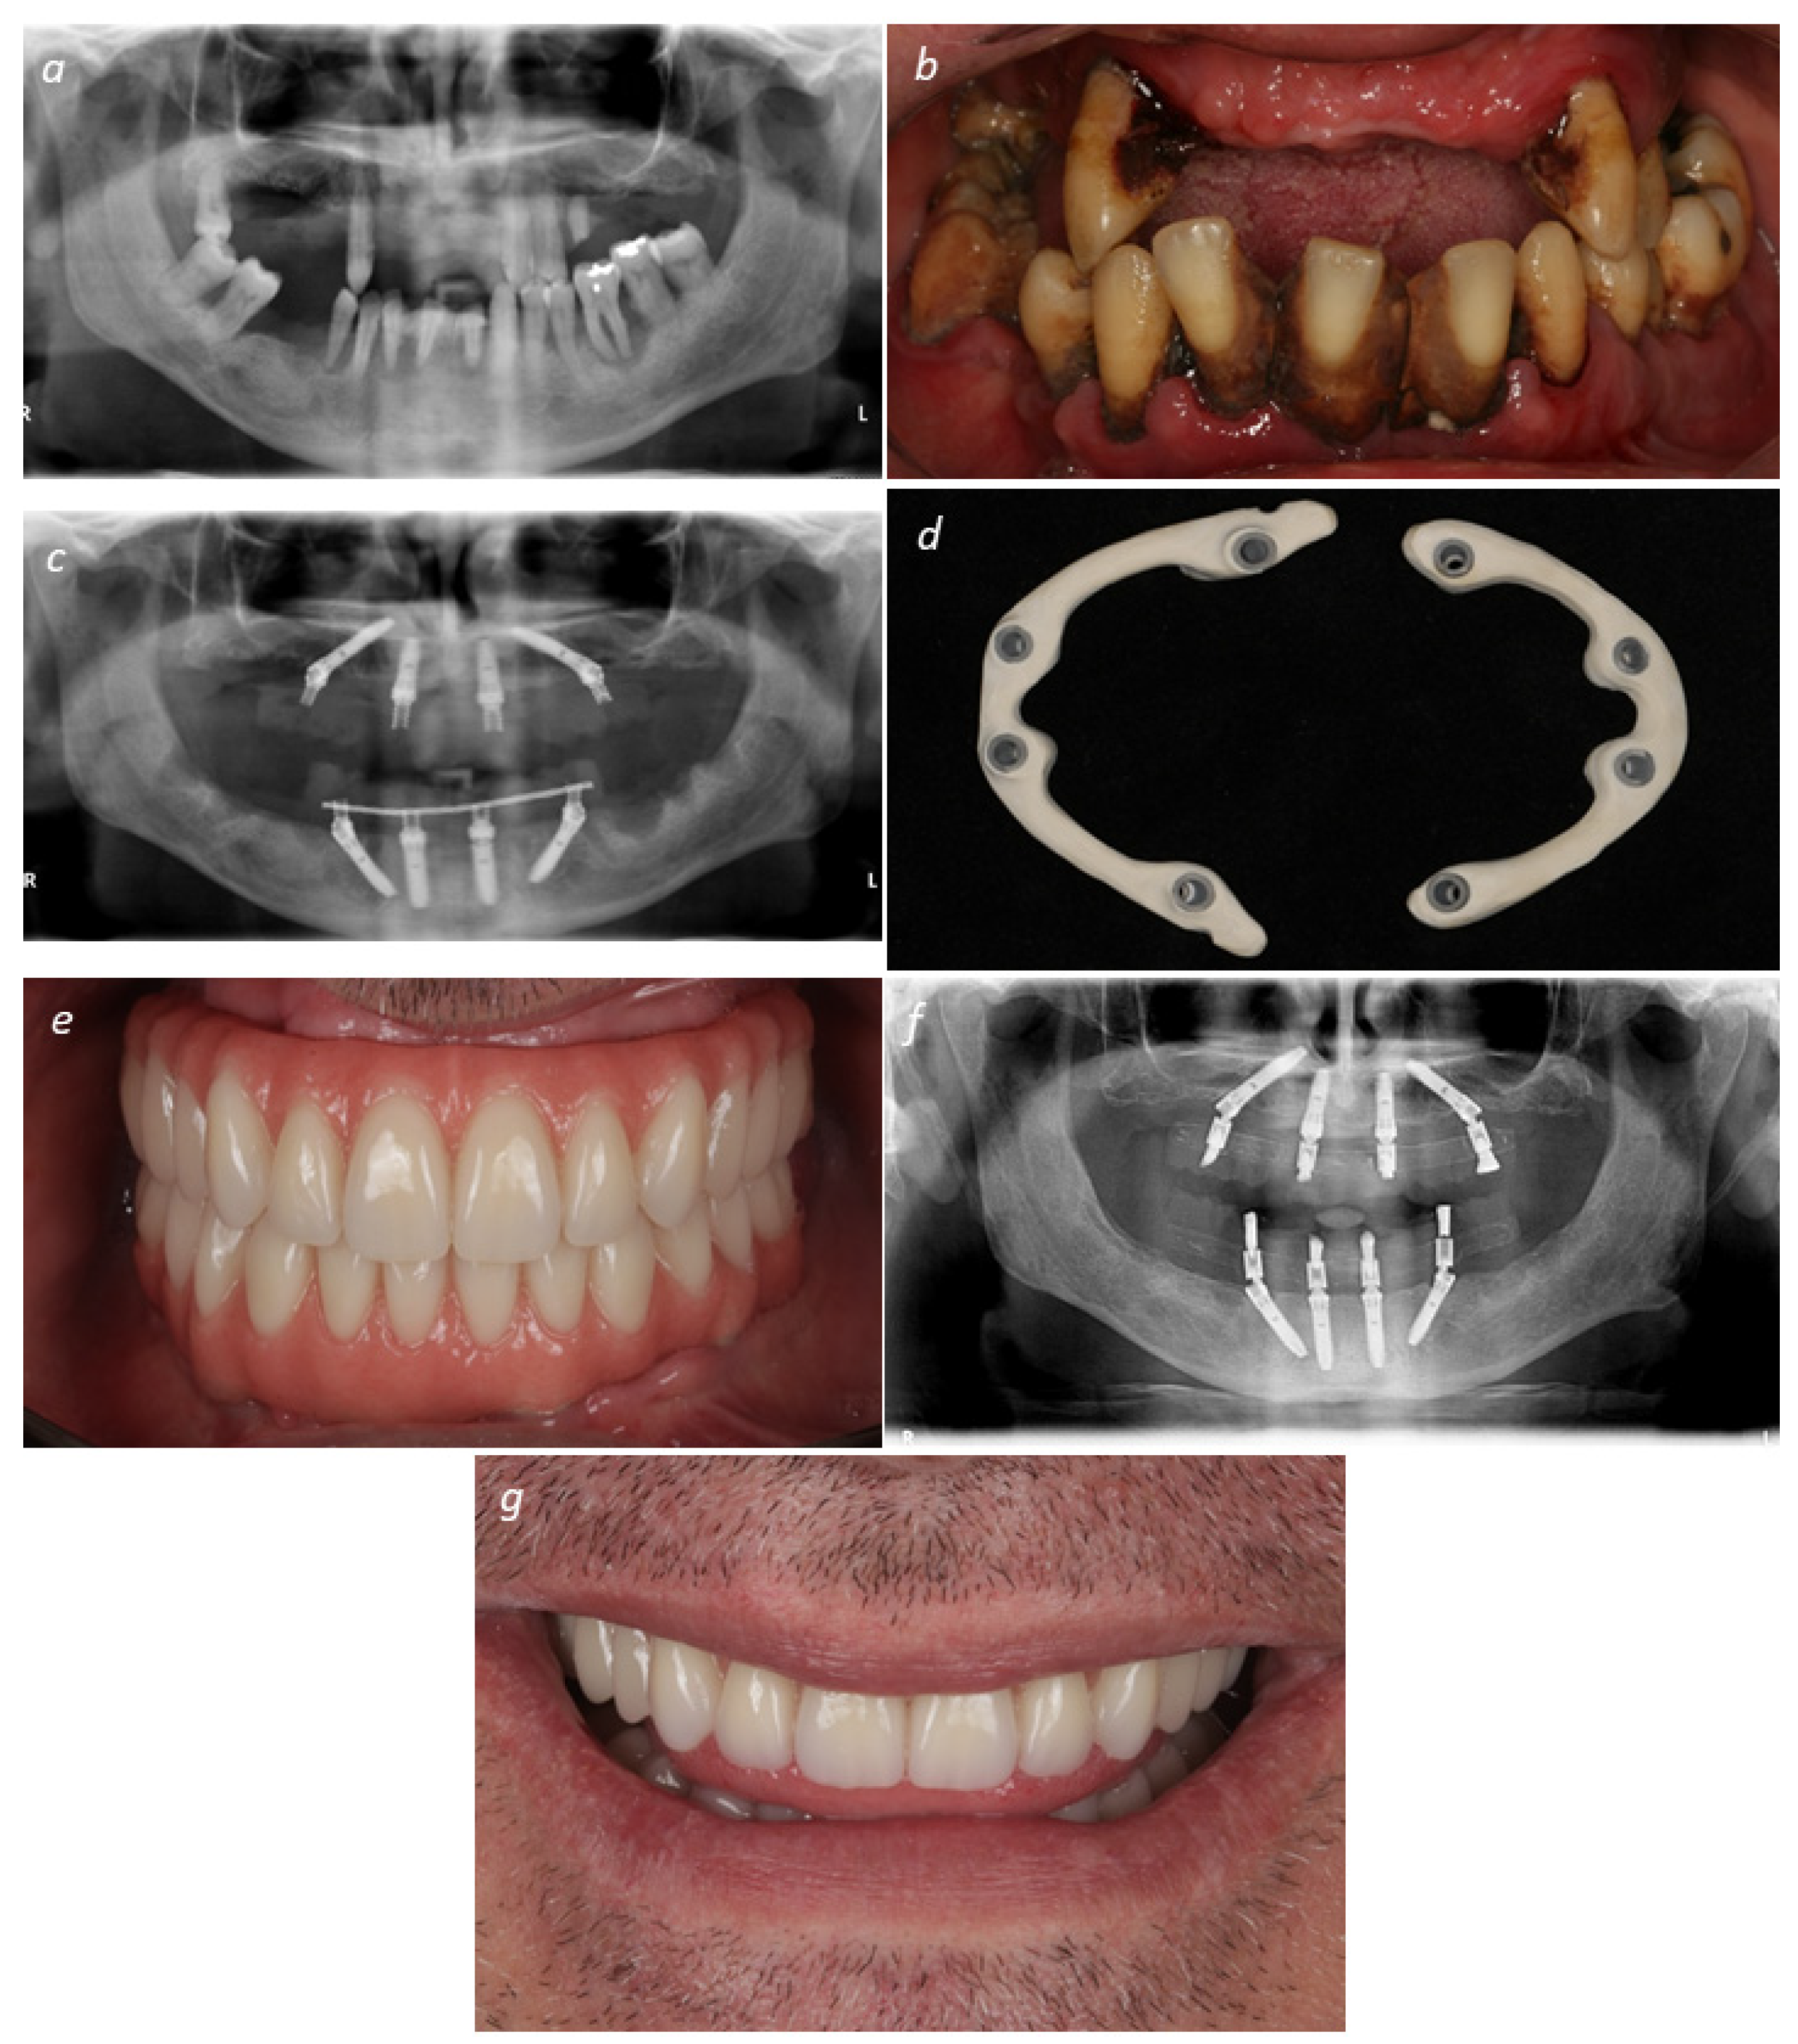 JCM | Free Full-Text | Hybrid Polyetheretherketone (PEEK)–Acrylic Resin  Prostheses and the All-on-4 Concept: A Full-Arch Implant-Supported Fixed  Solution with 3 Years of Follow-Up | HTML